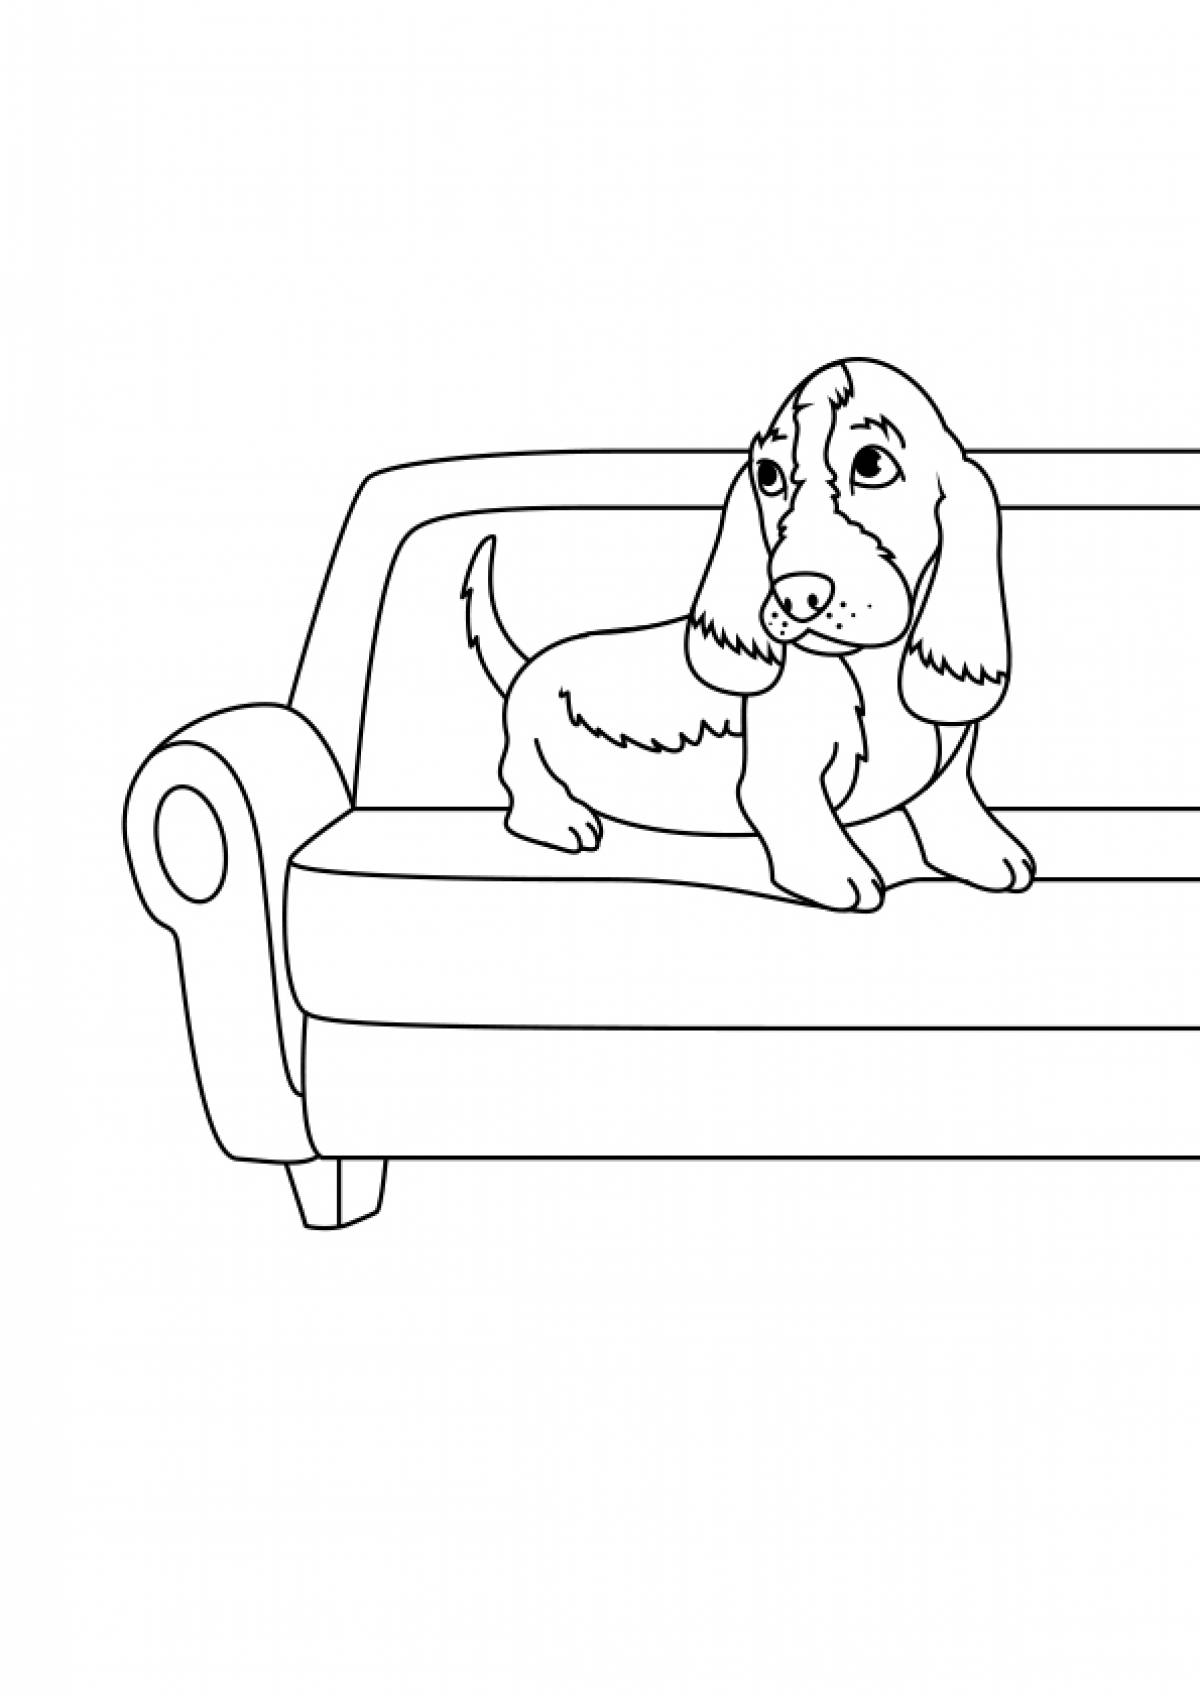 Dachshund on the couch